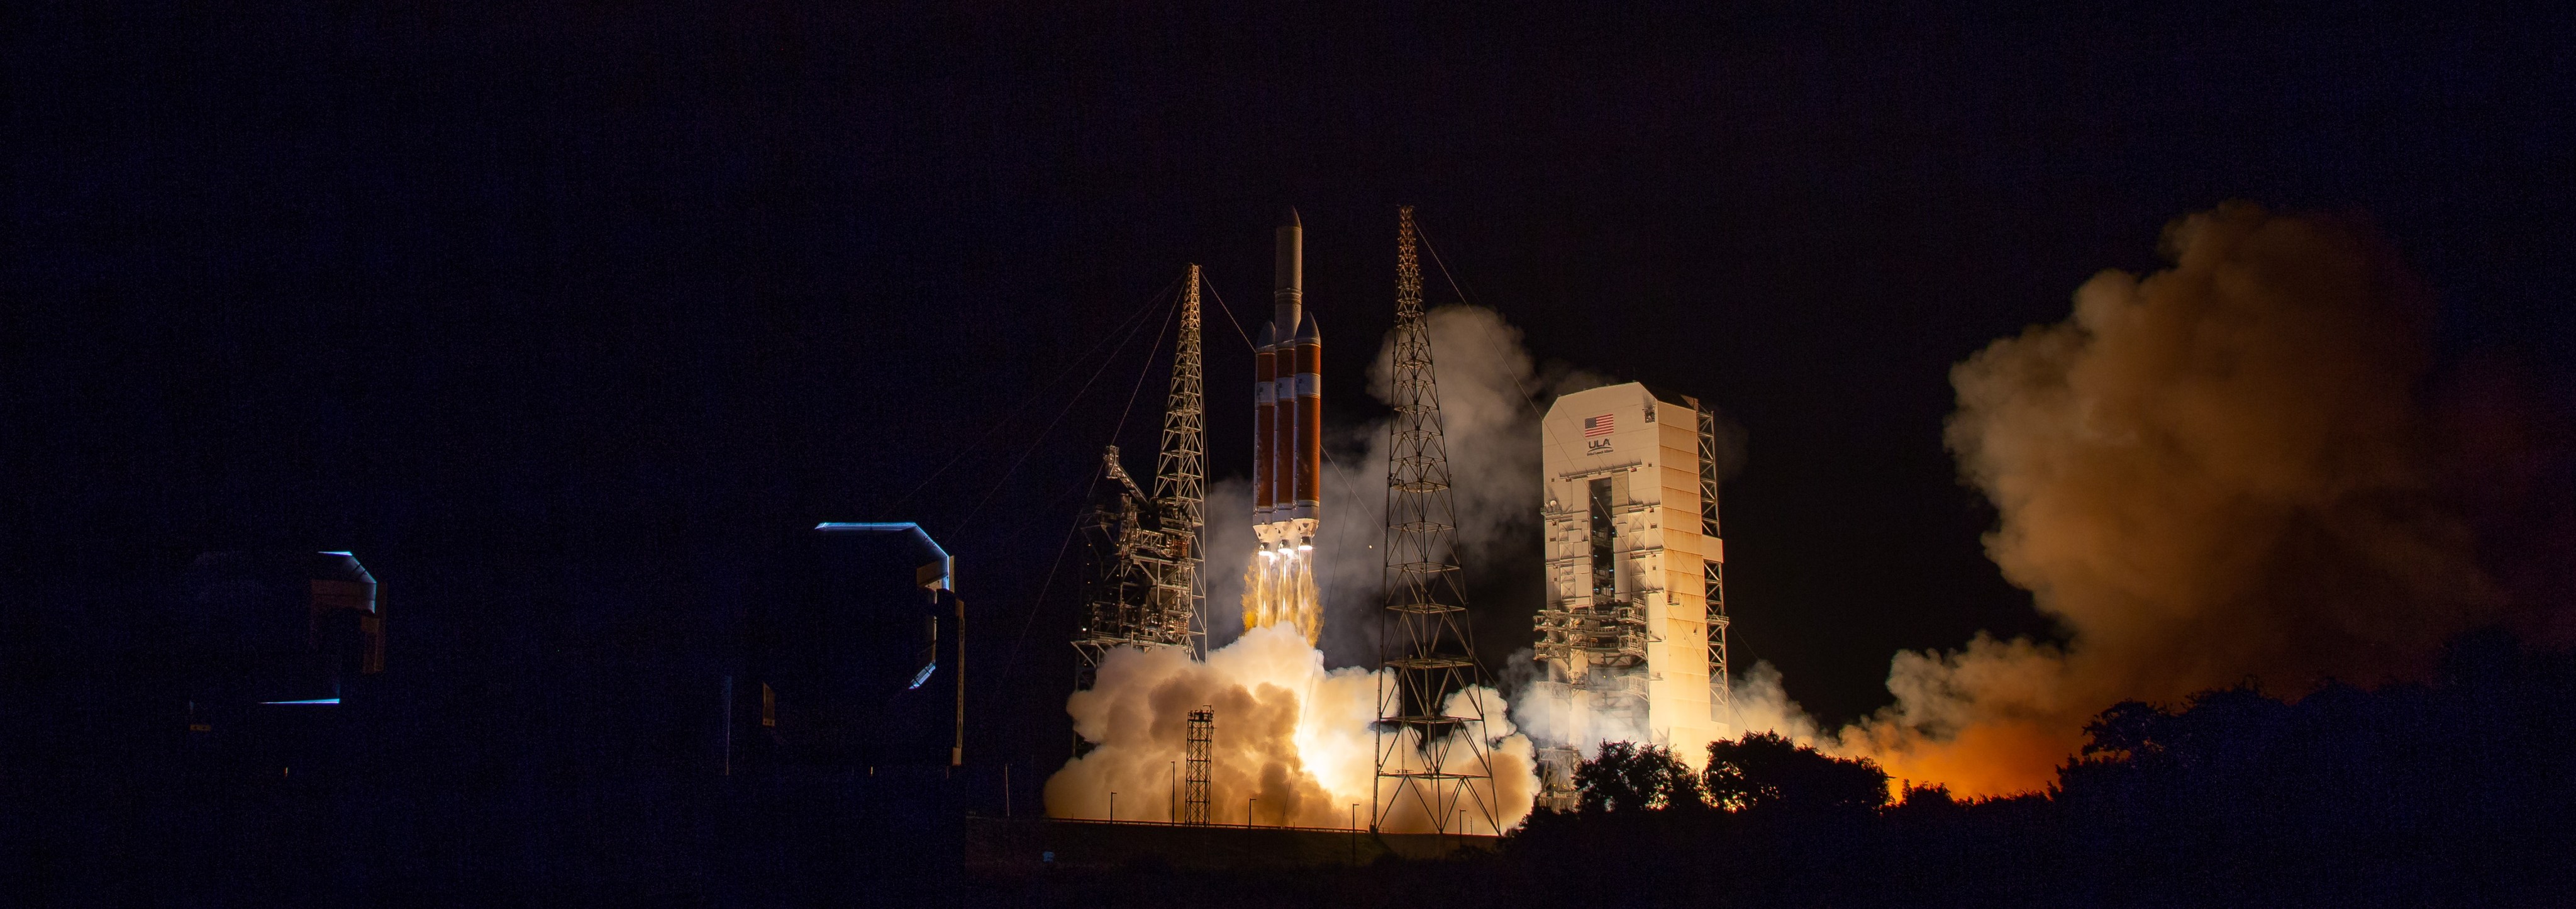 A rocket with orange and white boosters launches into the night sky. Clouds of smoke are beneath the rocket as it lifts off. A white launch tower lit with bright lights is nearby. Metal support towers also are visible.